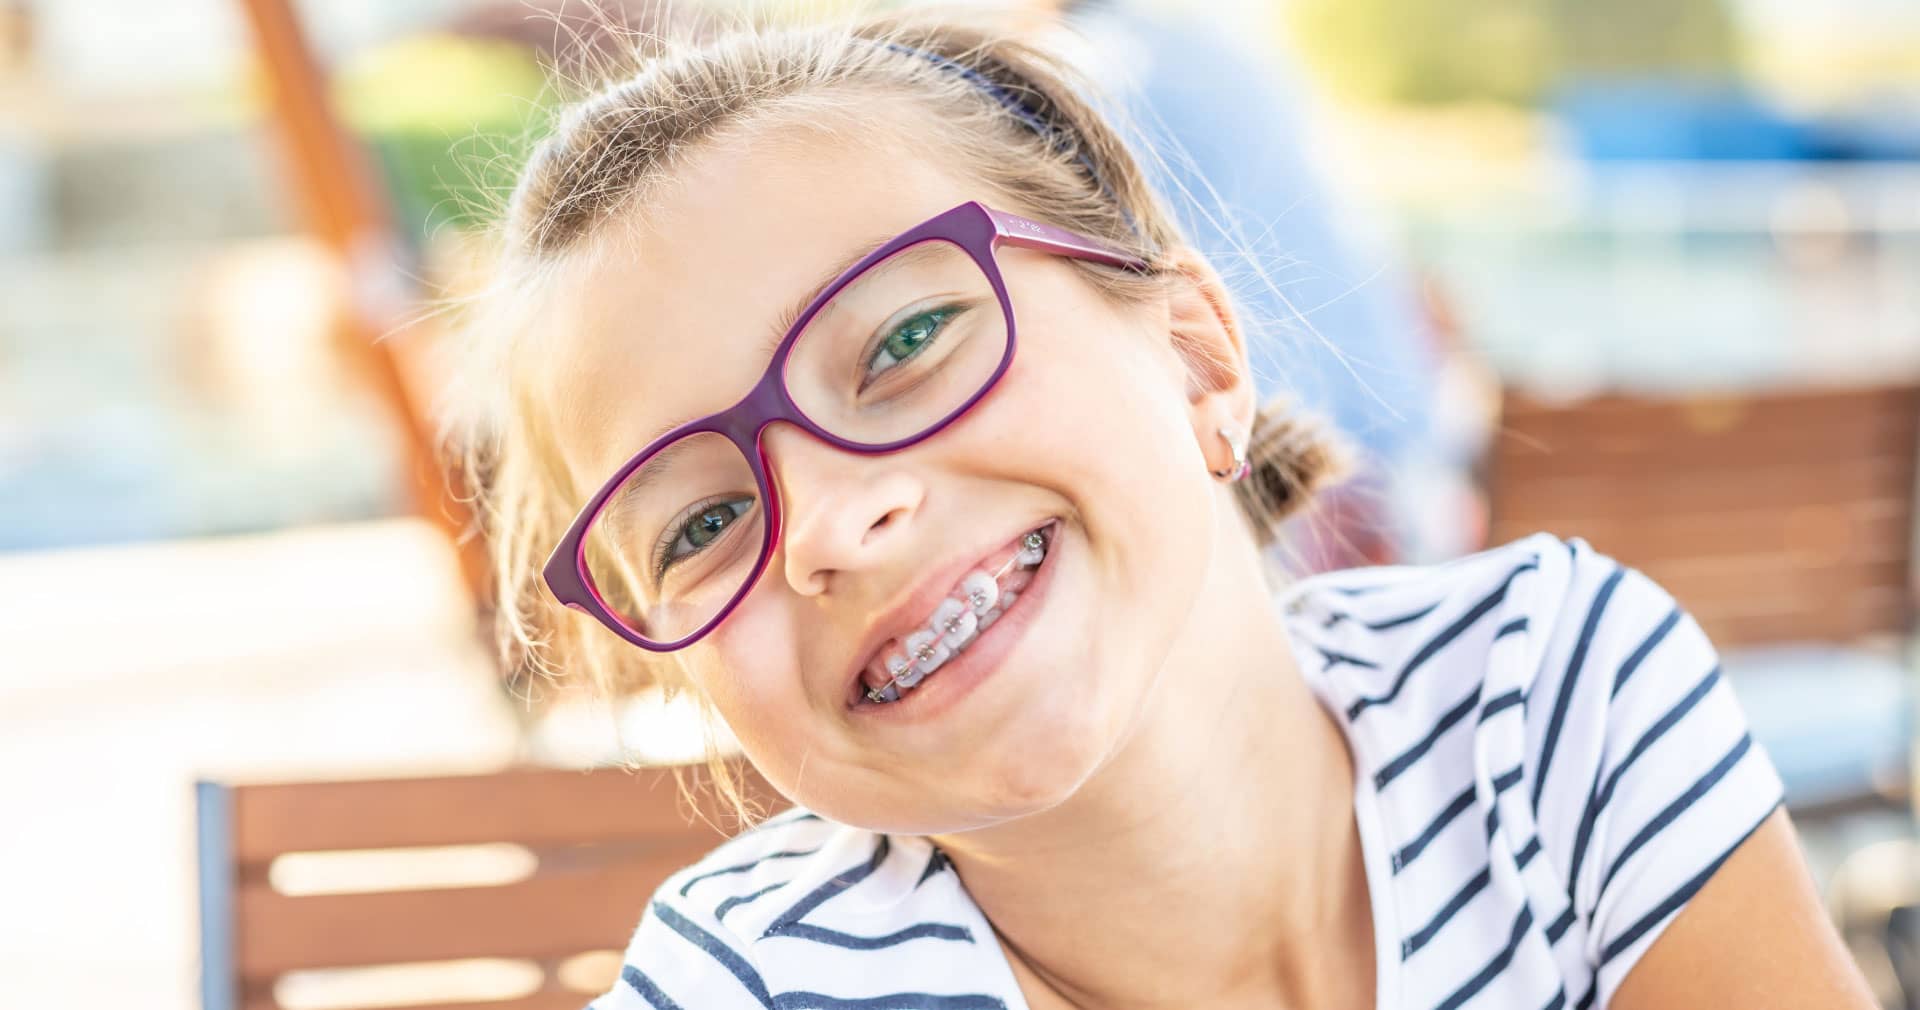 preteen girl with braces and purple glasses